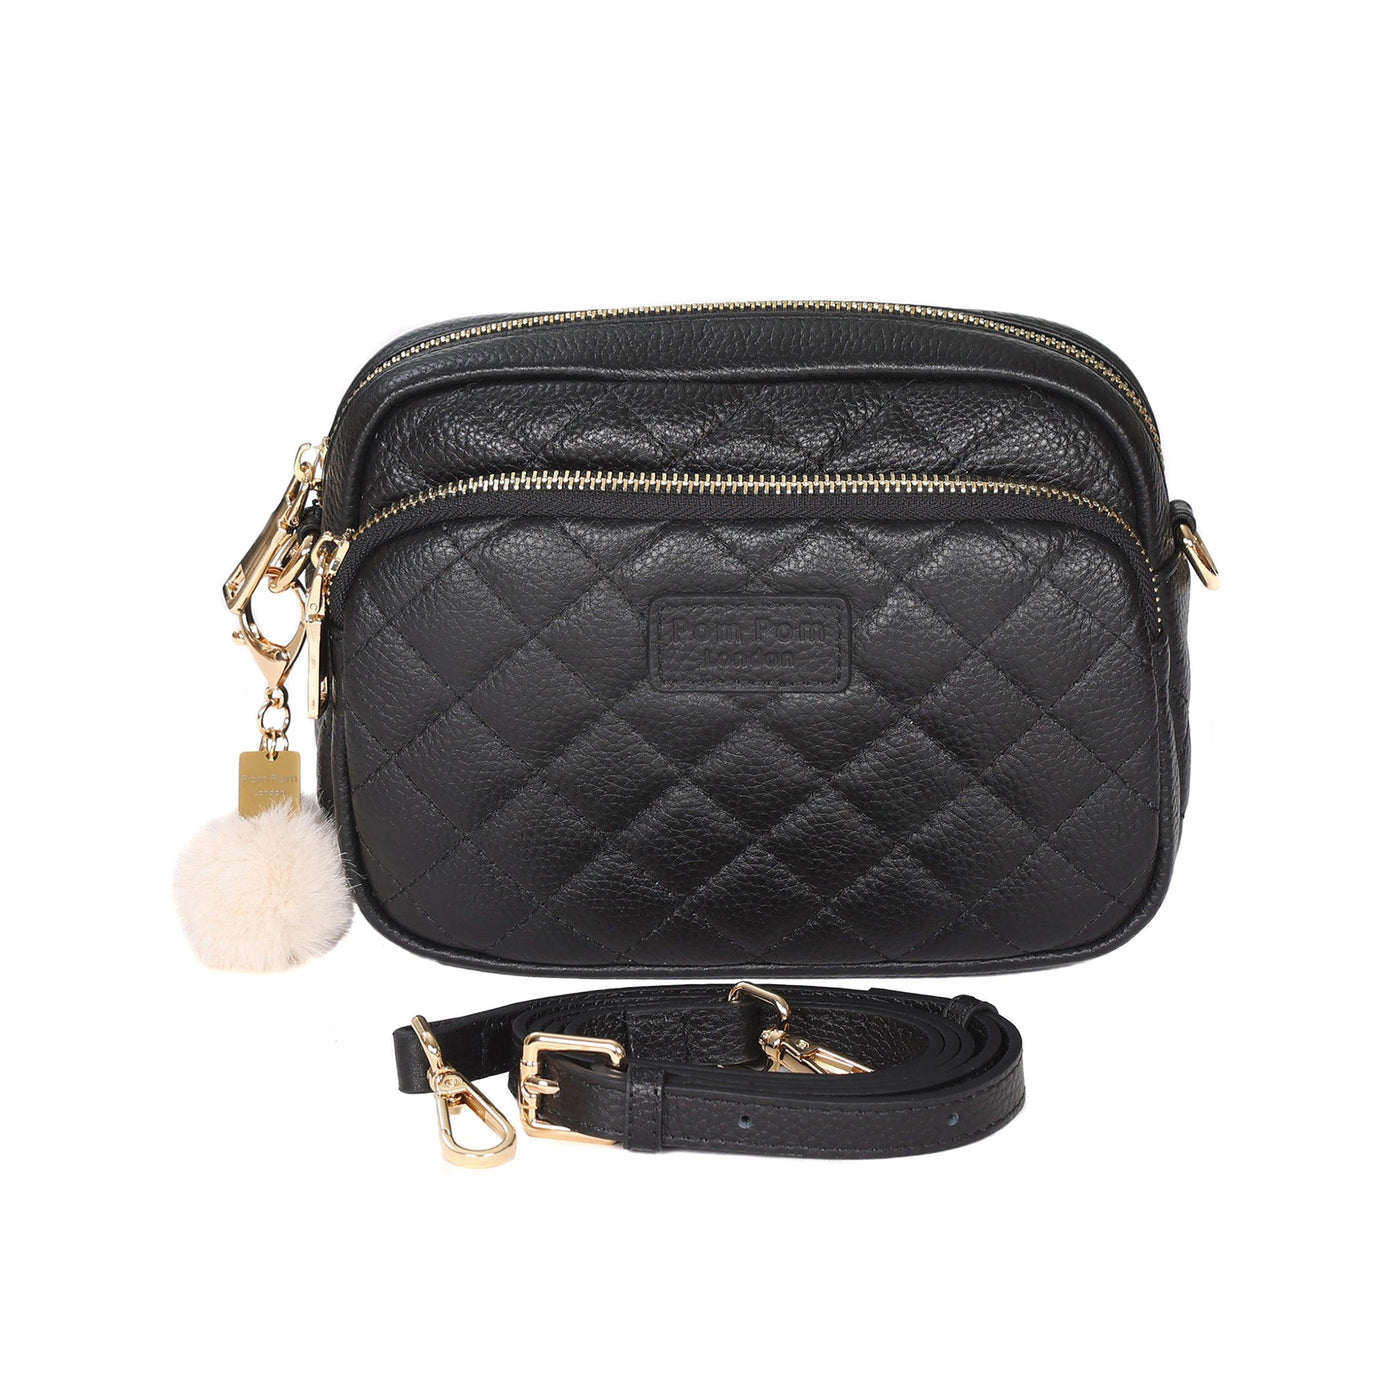 Quilted Mayfair Bag Black & Accessories - Pom Pom London